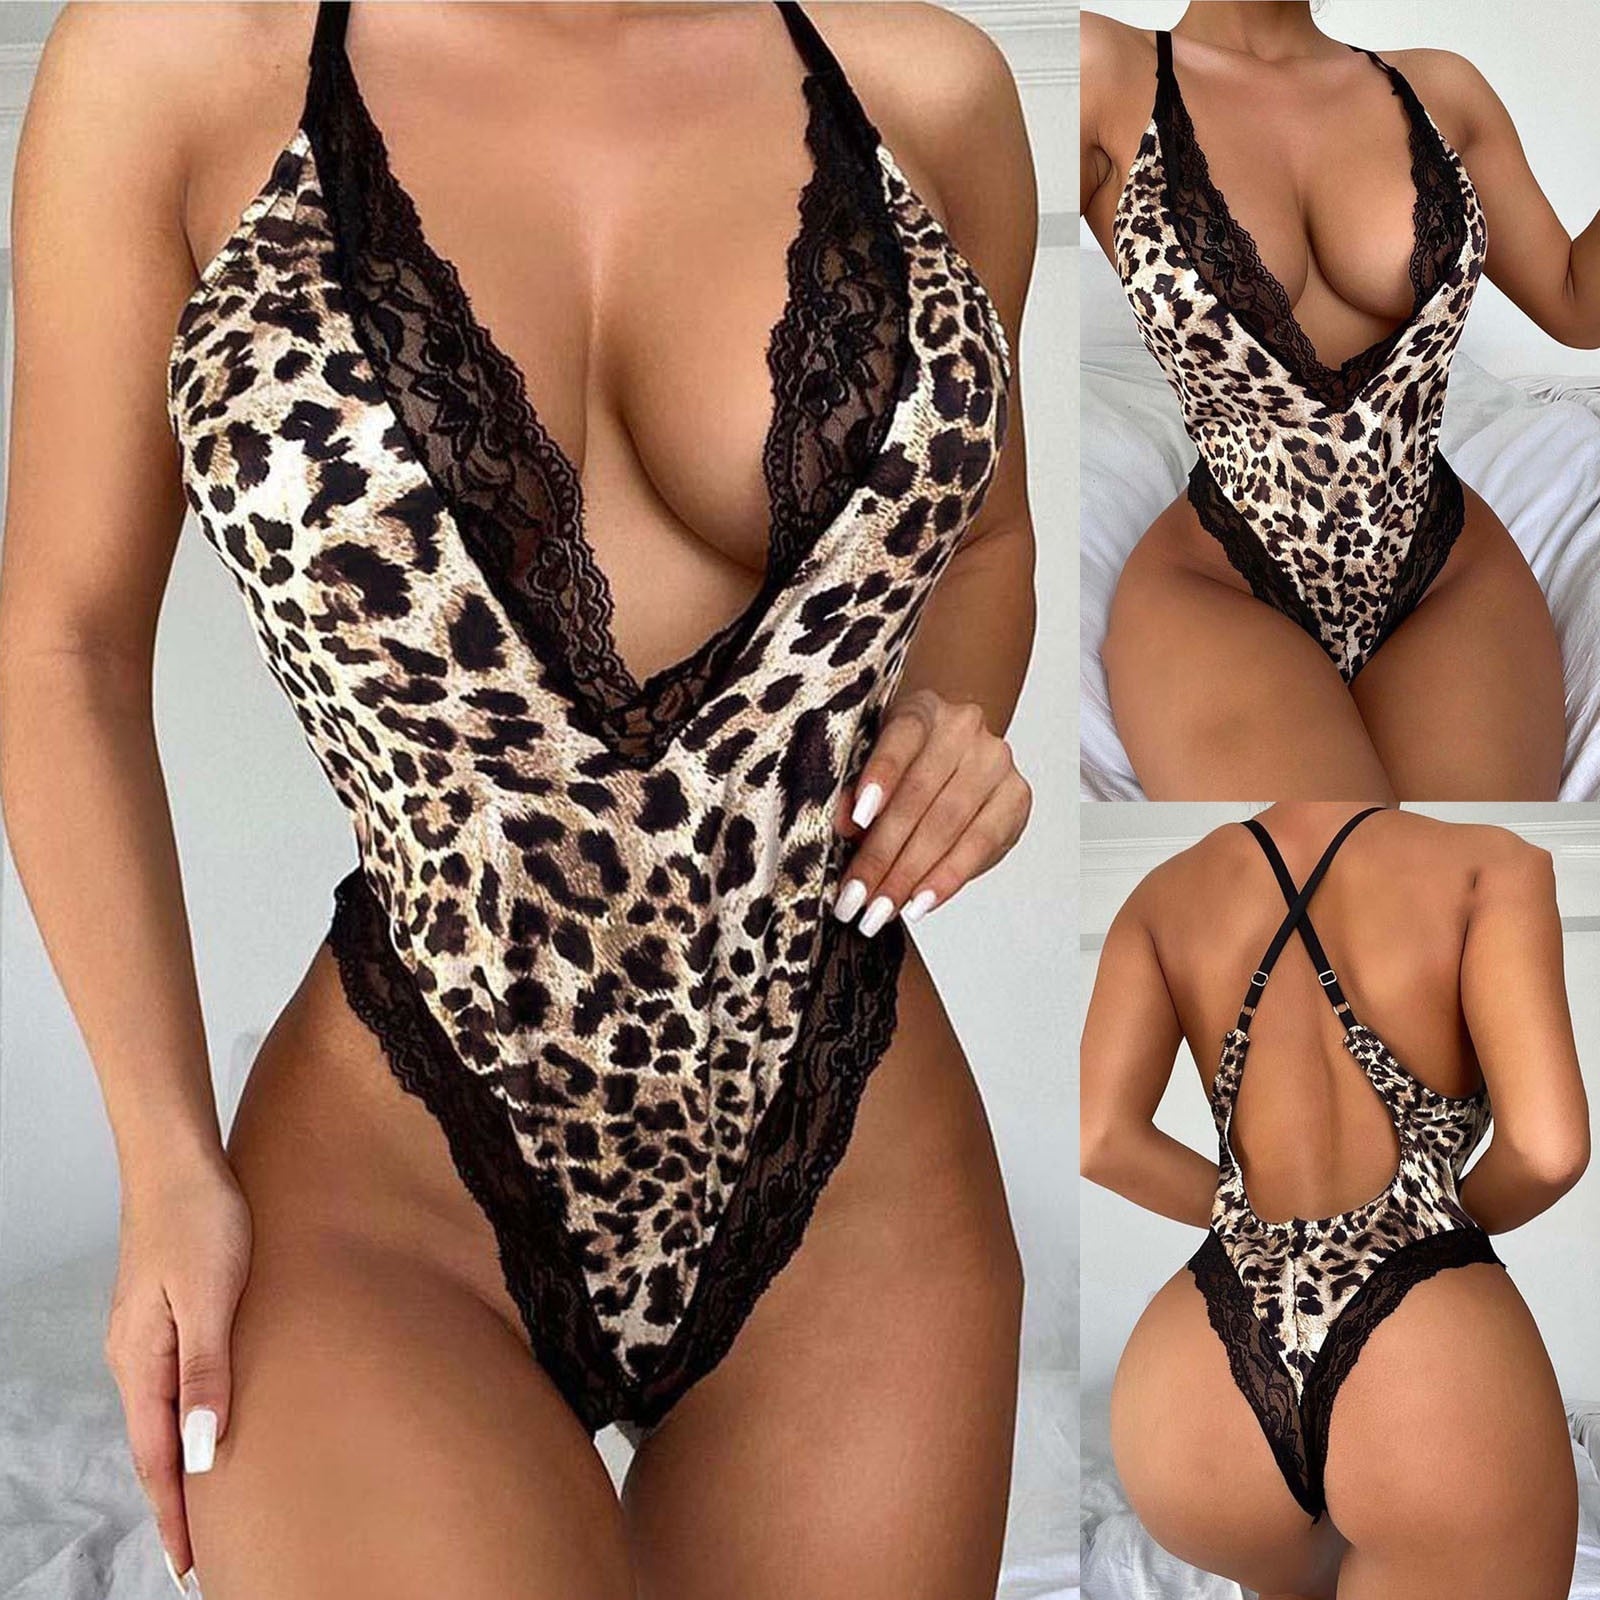 Porno Sexy Costumes Women Leopard Lace Bodysuit Erotic Baby Dolls Sexy Hot Erotic Lingerie